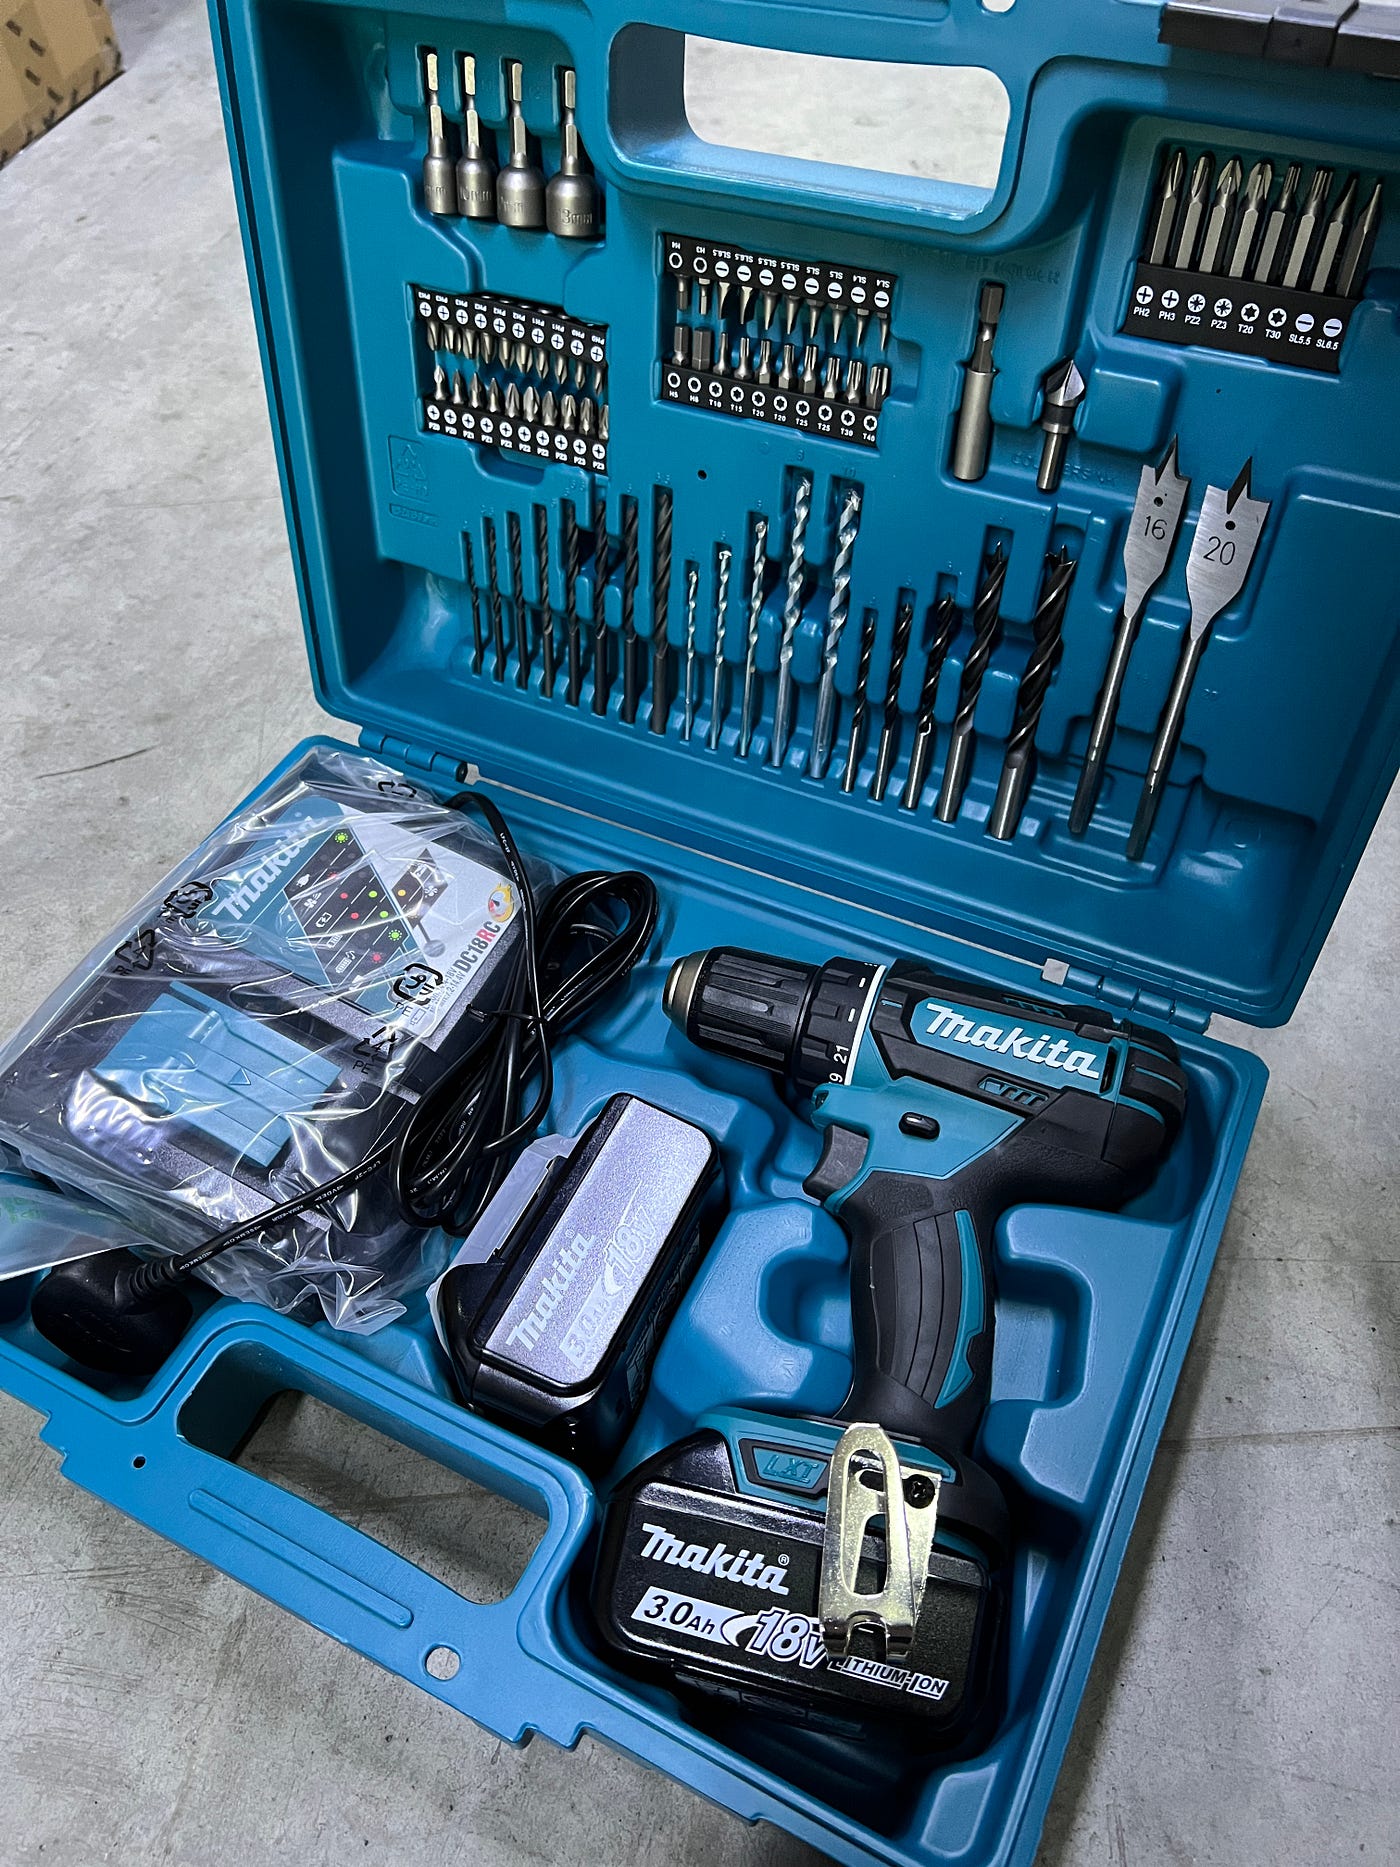 Makita DDF482RFX1: A Comprehensive Power Tool with 74 Accessories and More!  | by Misterkio Store | Medium